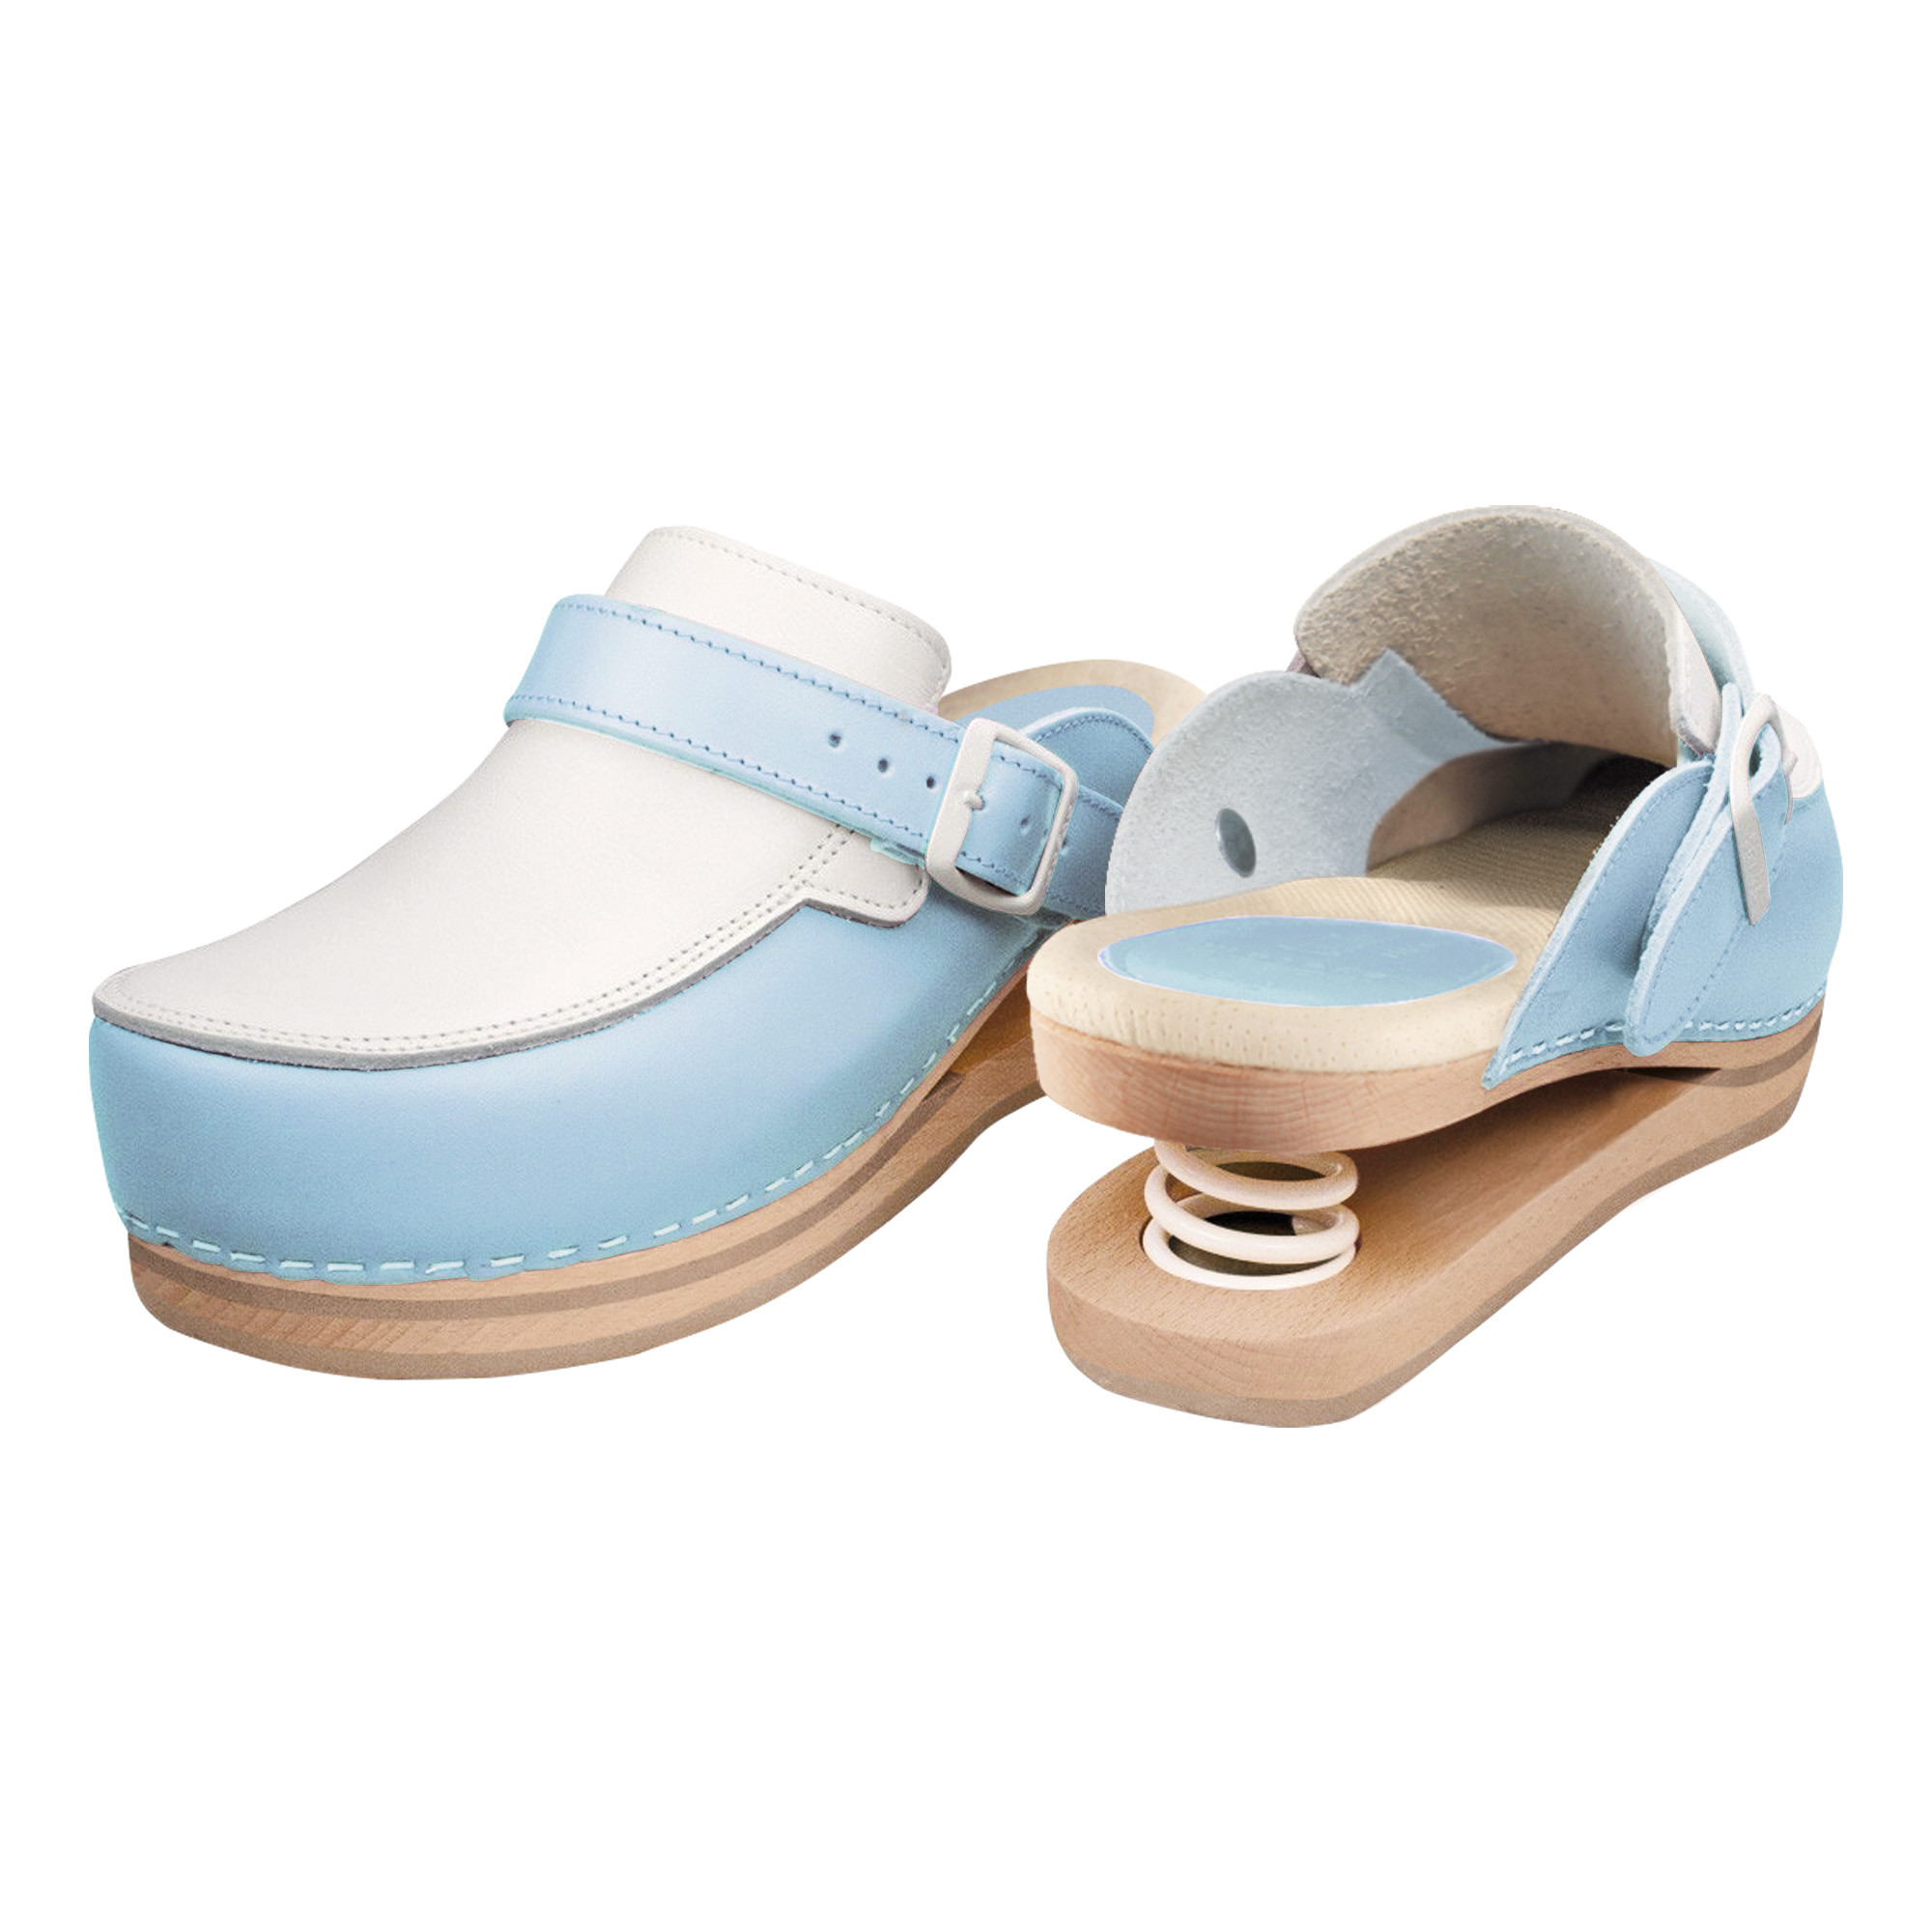 Relax clogs closed with blue spring Size 38